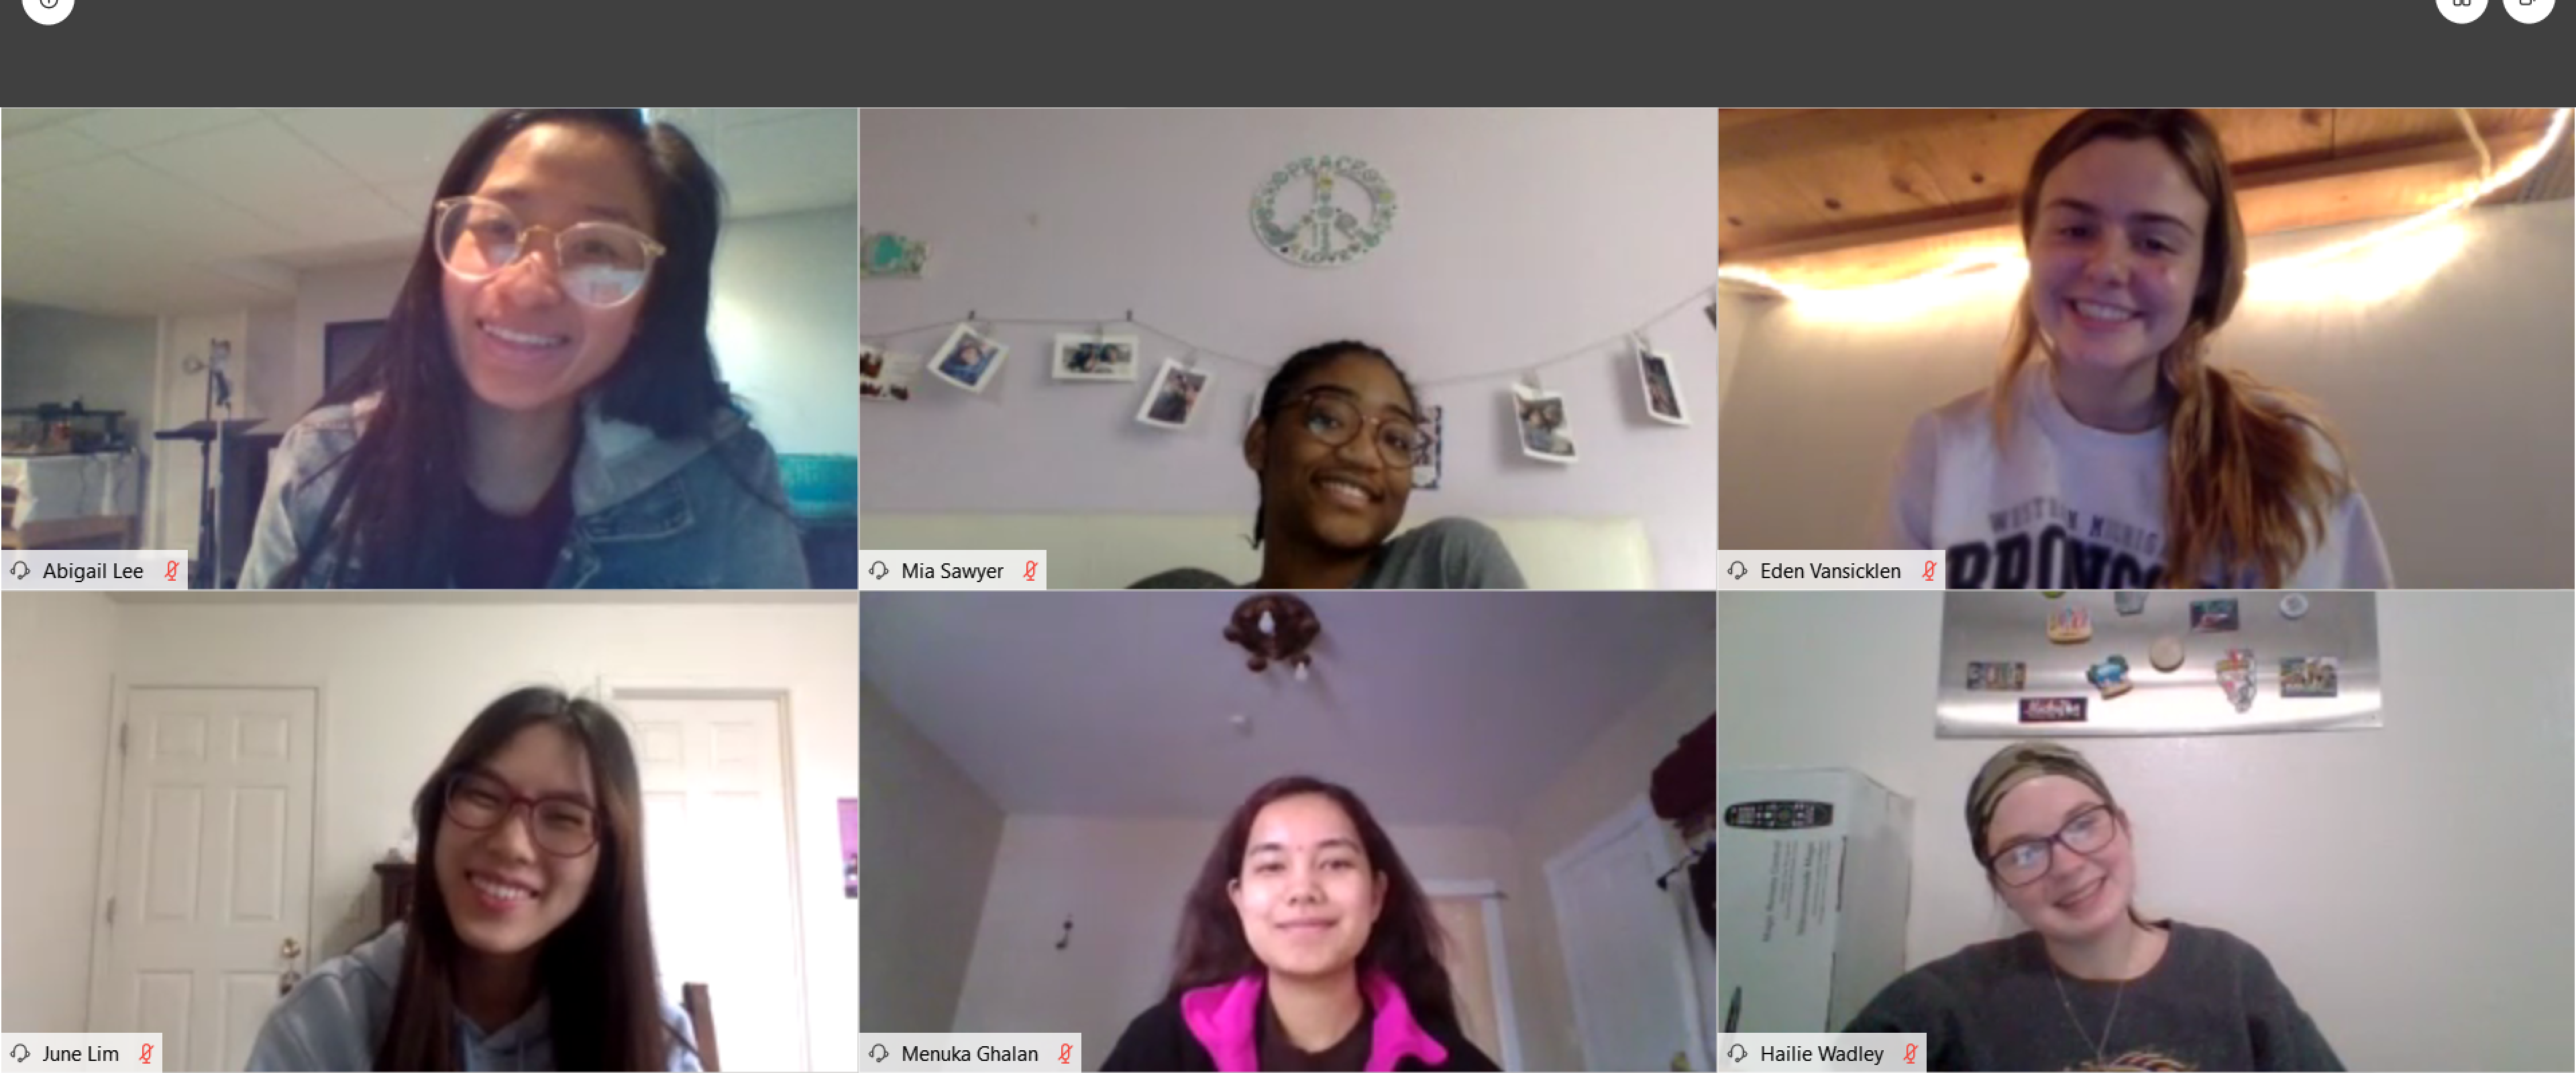 Screenshot of six mentors during a virtual study session on Webex.